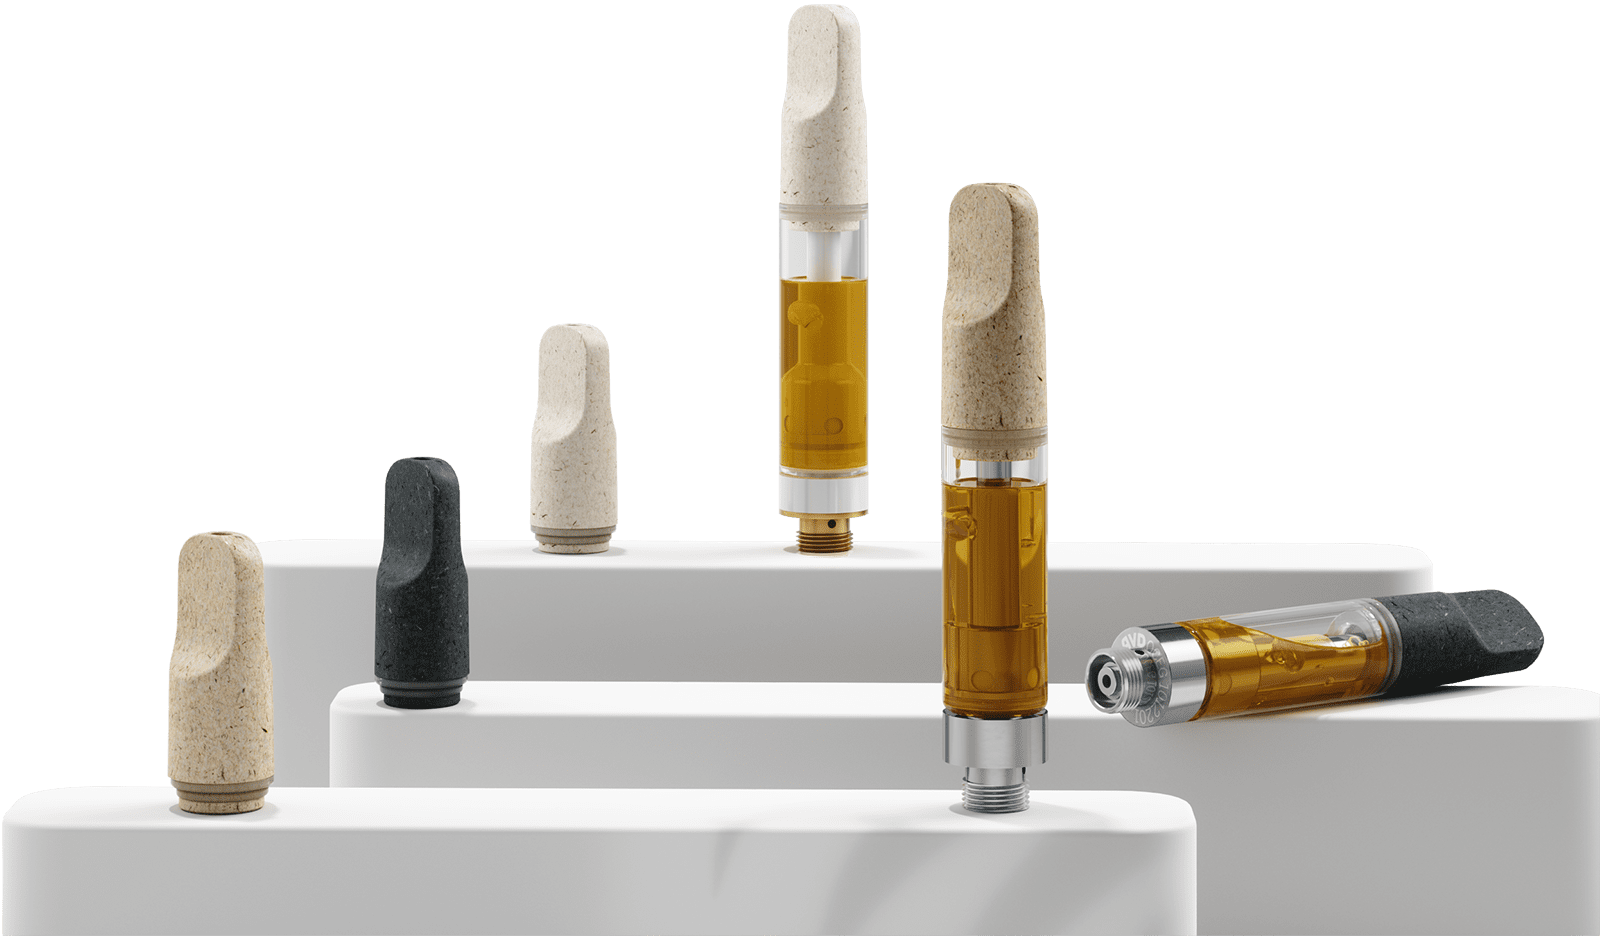 New AVD product releases-hemp mouthpieces, Batteries, packaging